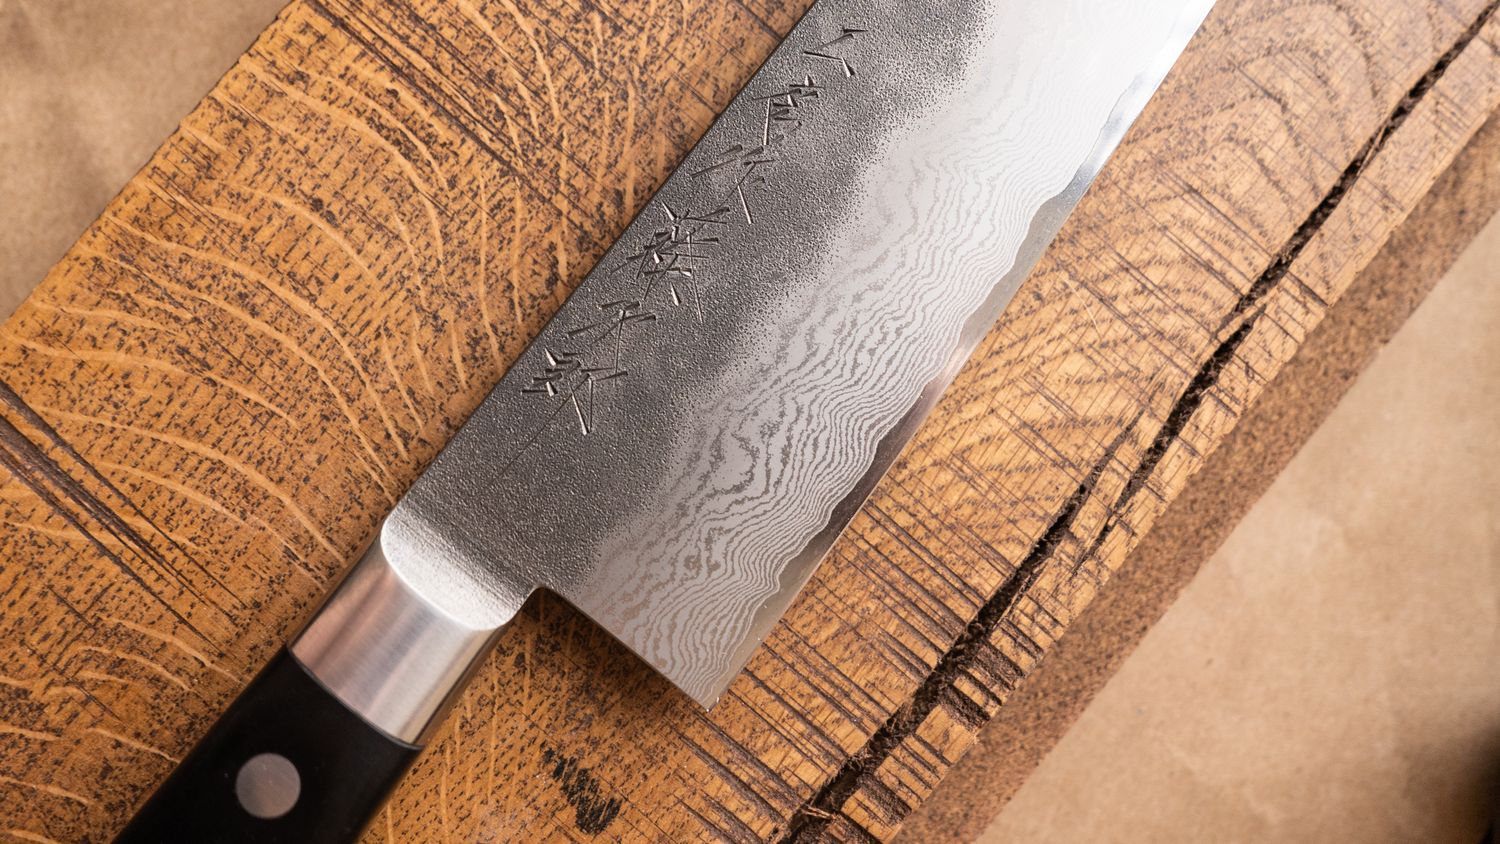 Why are Japanese Kitchen Knives so Expensive?